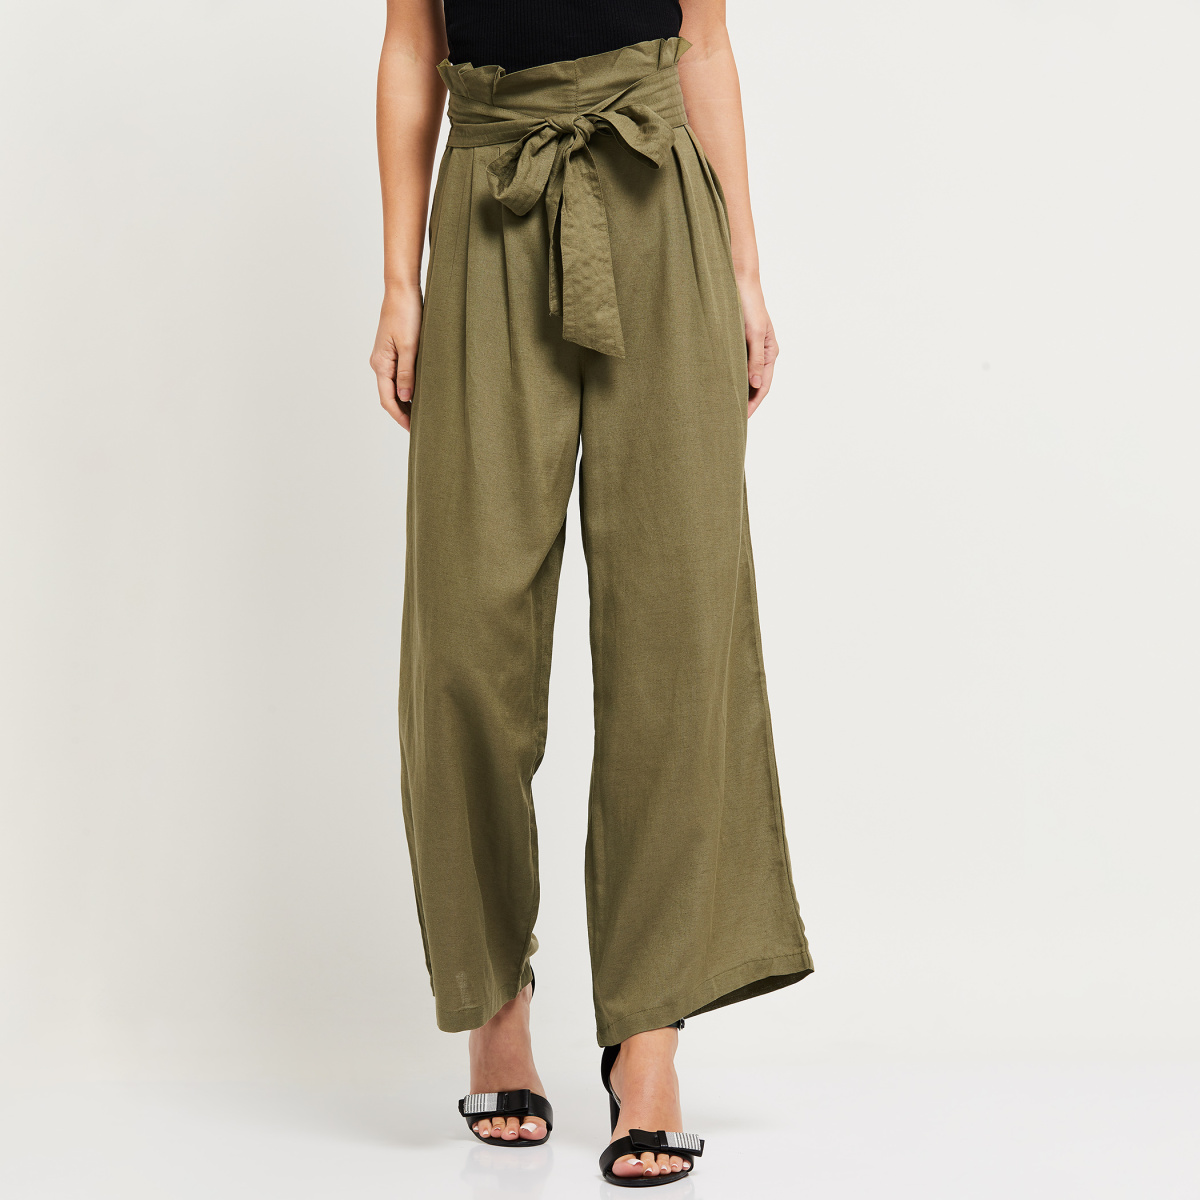 Add a Chic Edge to Your Wardrobe with Our Leather Pants with Tie Up Belt